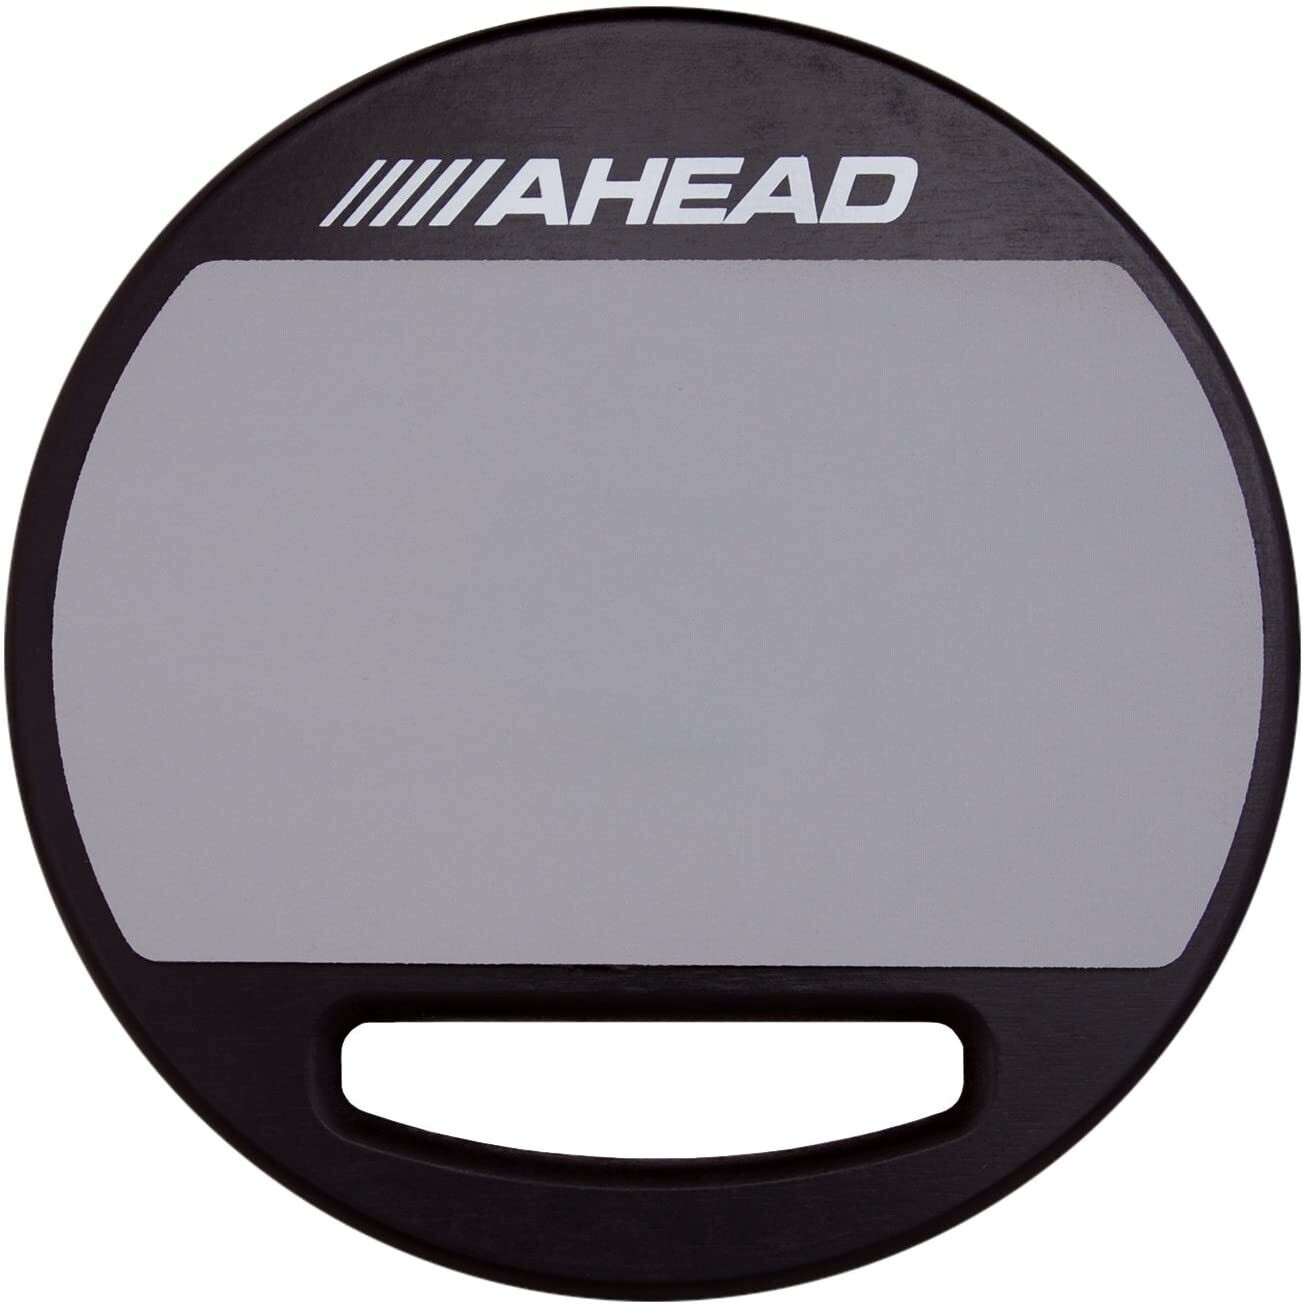 Ahead – 10′ Snare Pad With Snare Sound